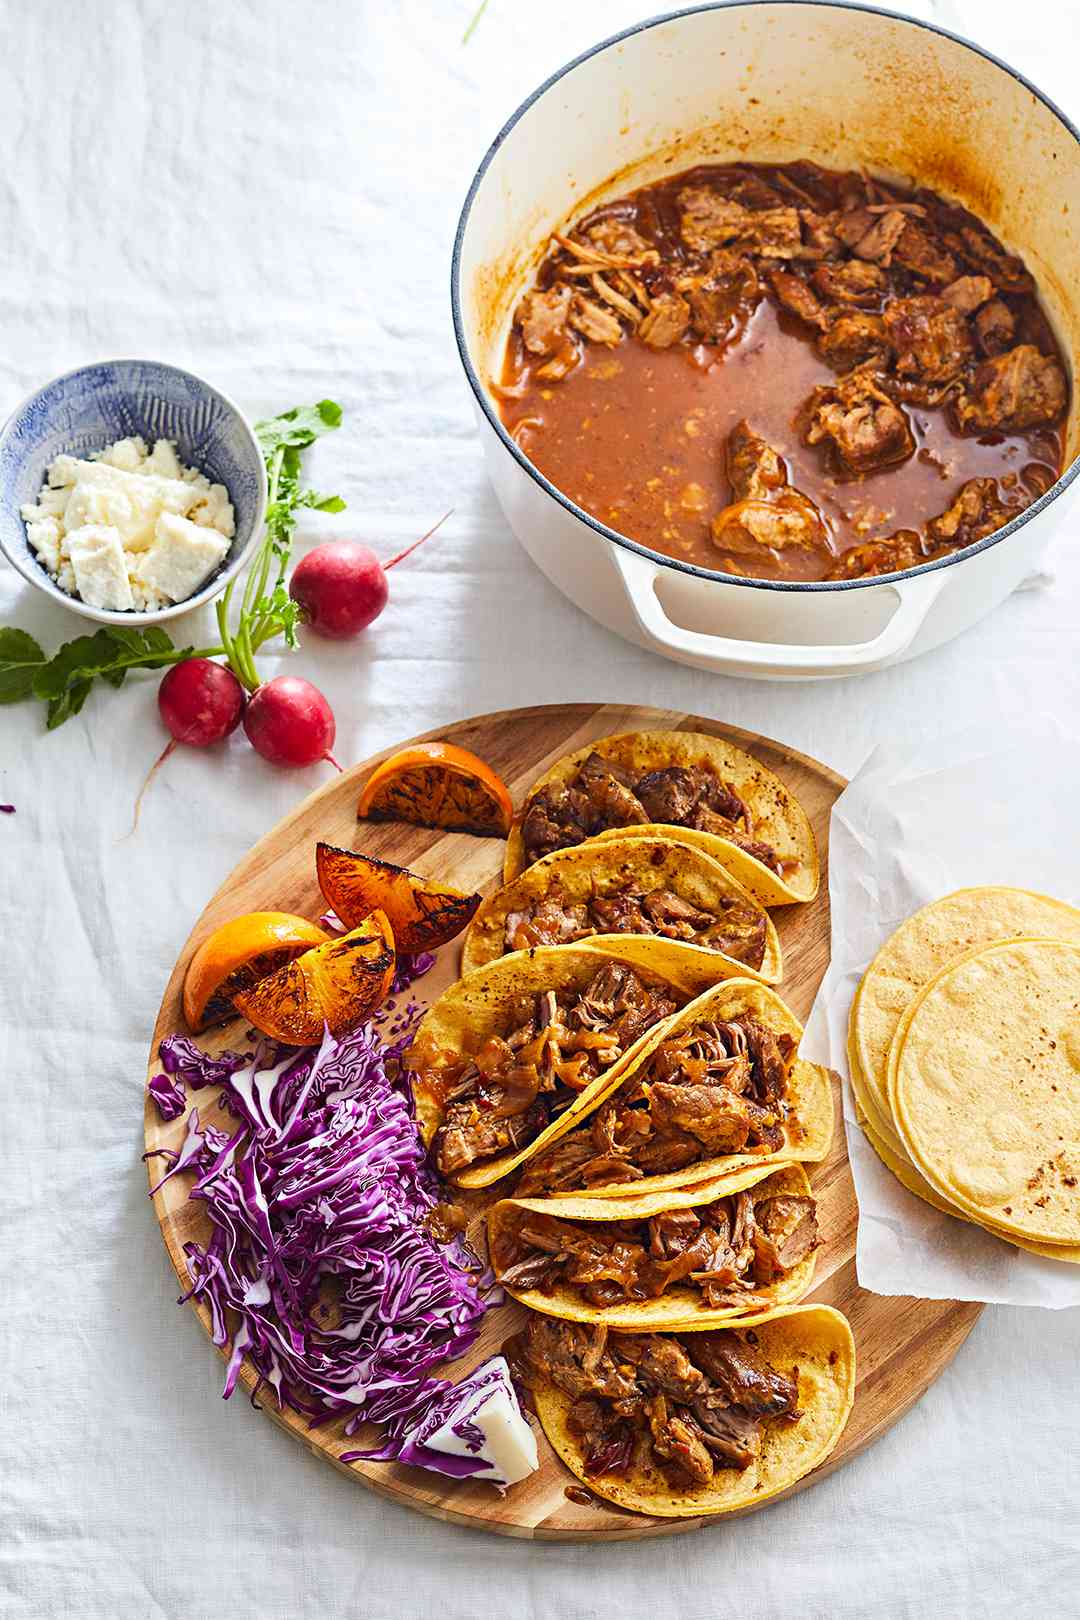 Chipotle Pork Tacos with sliced red cabbage and roasted lemons